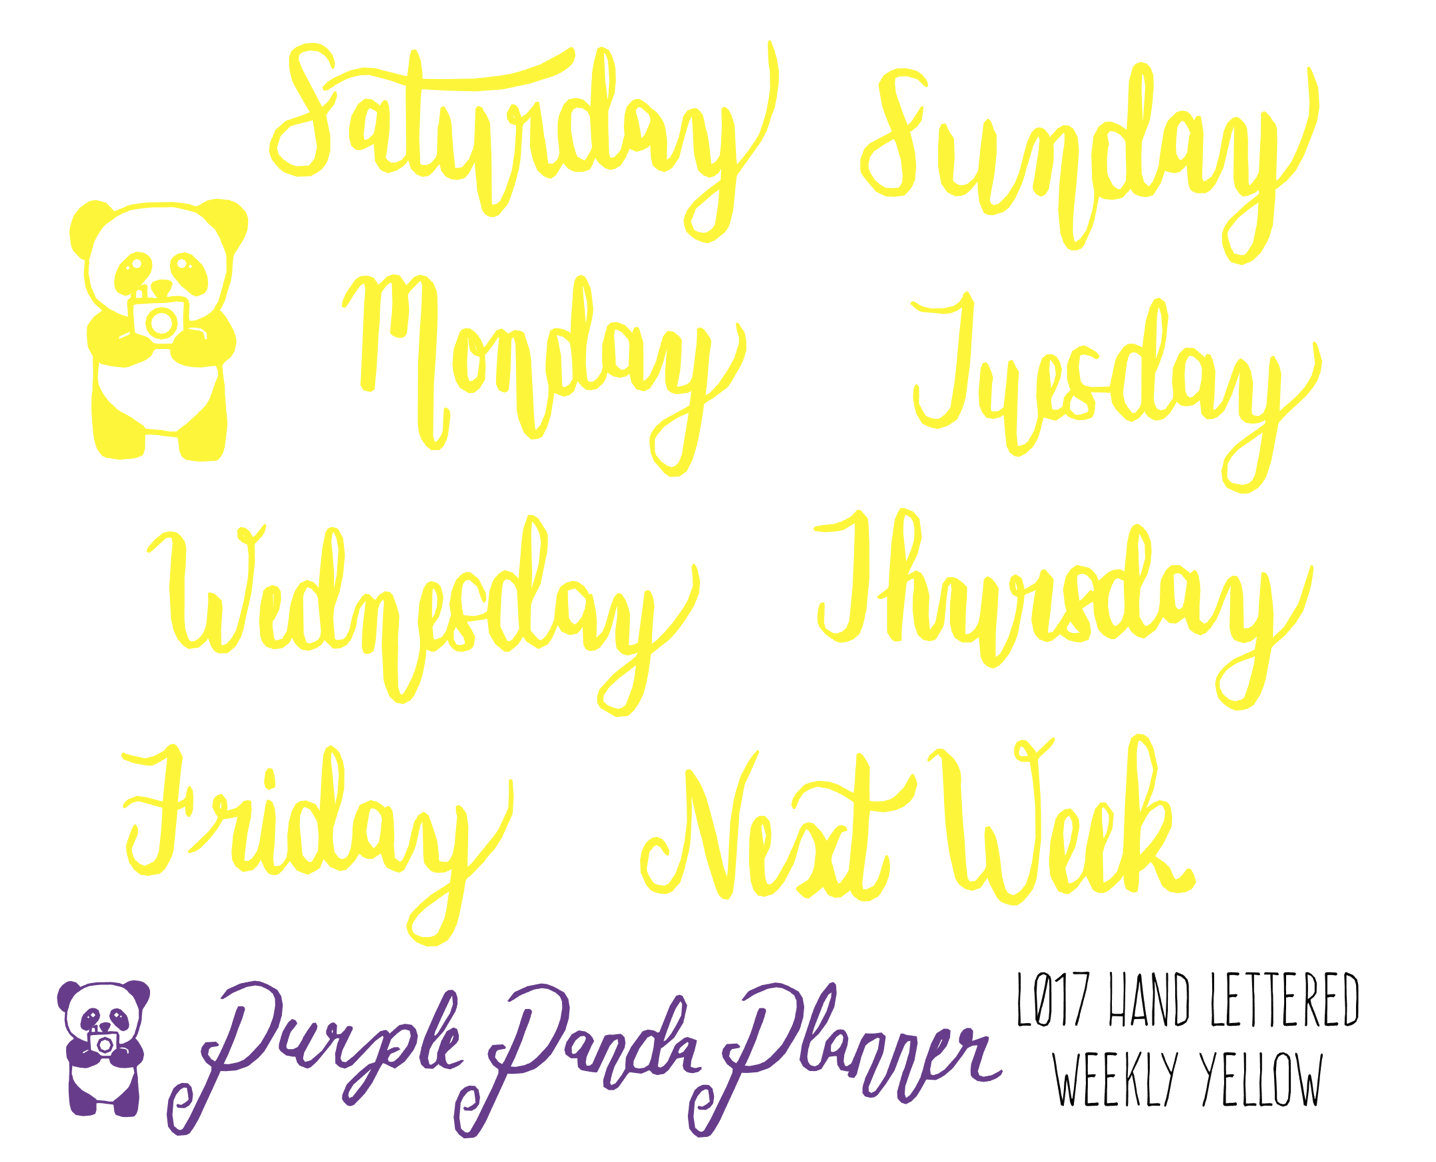 Hand Lettered Days of the Week, Weekly Header Stickers Colour Collection 2